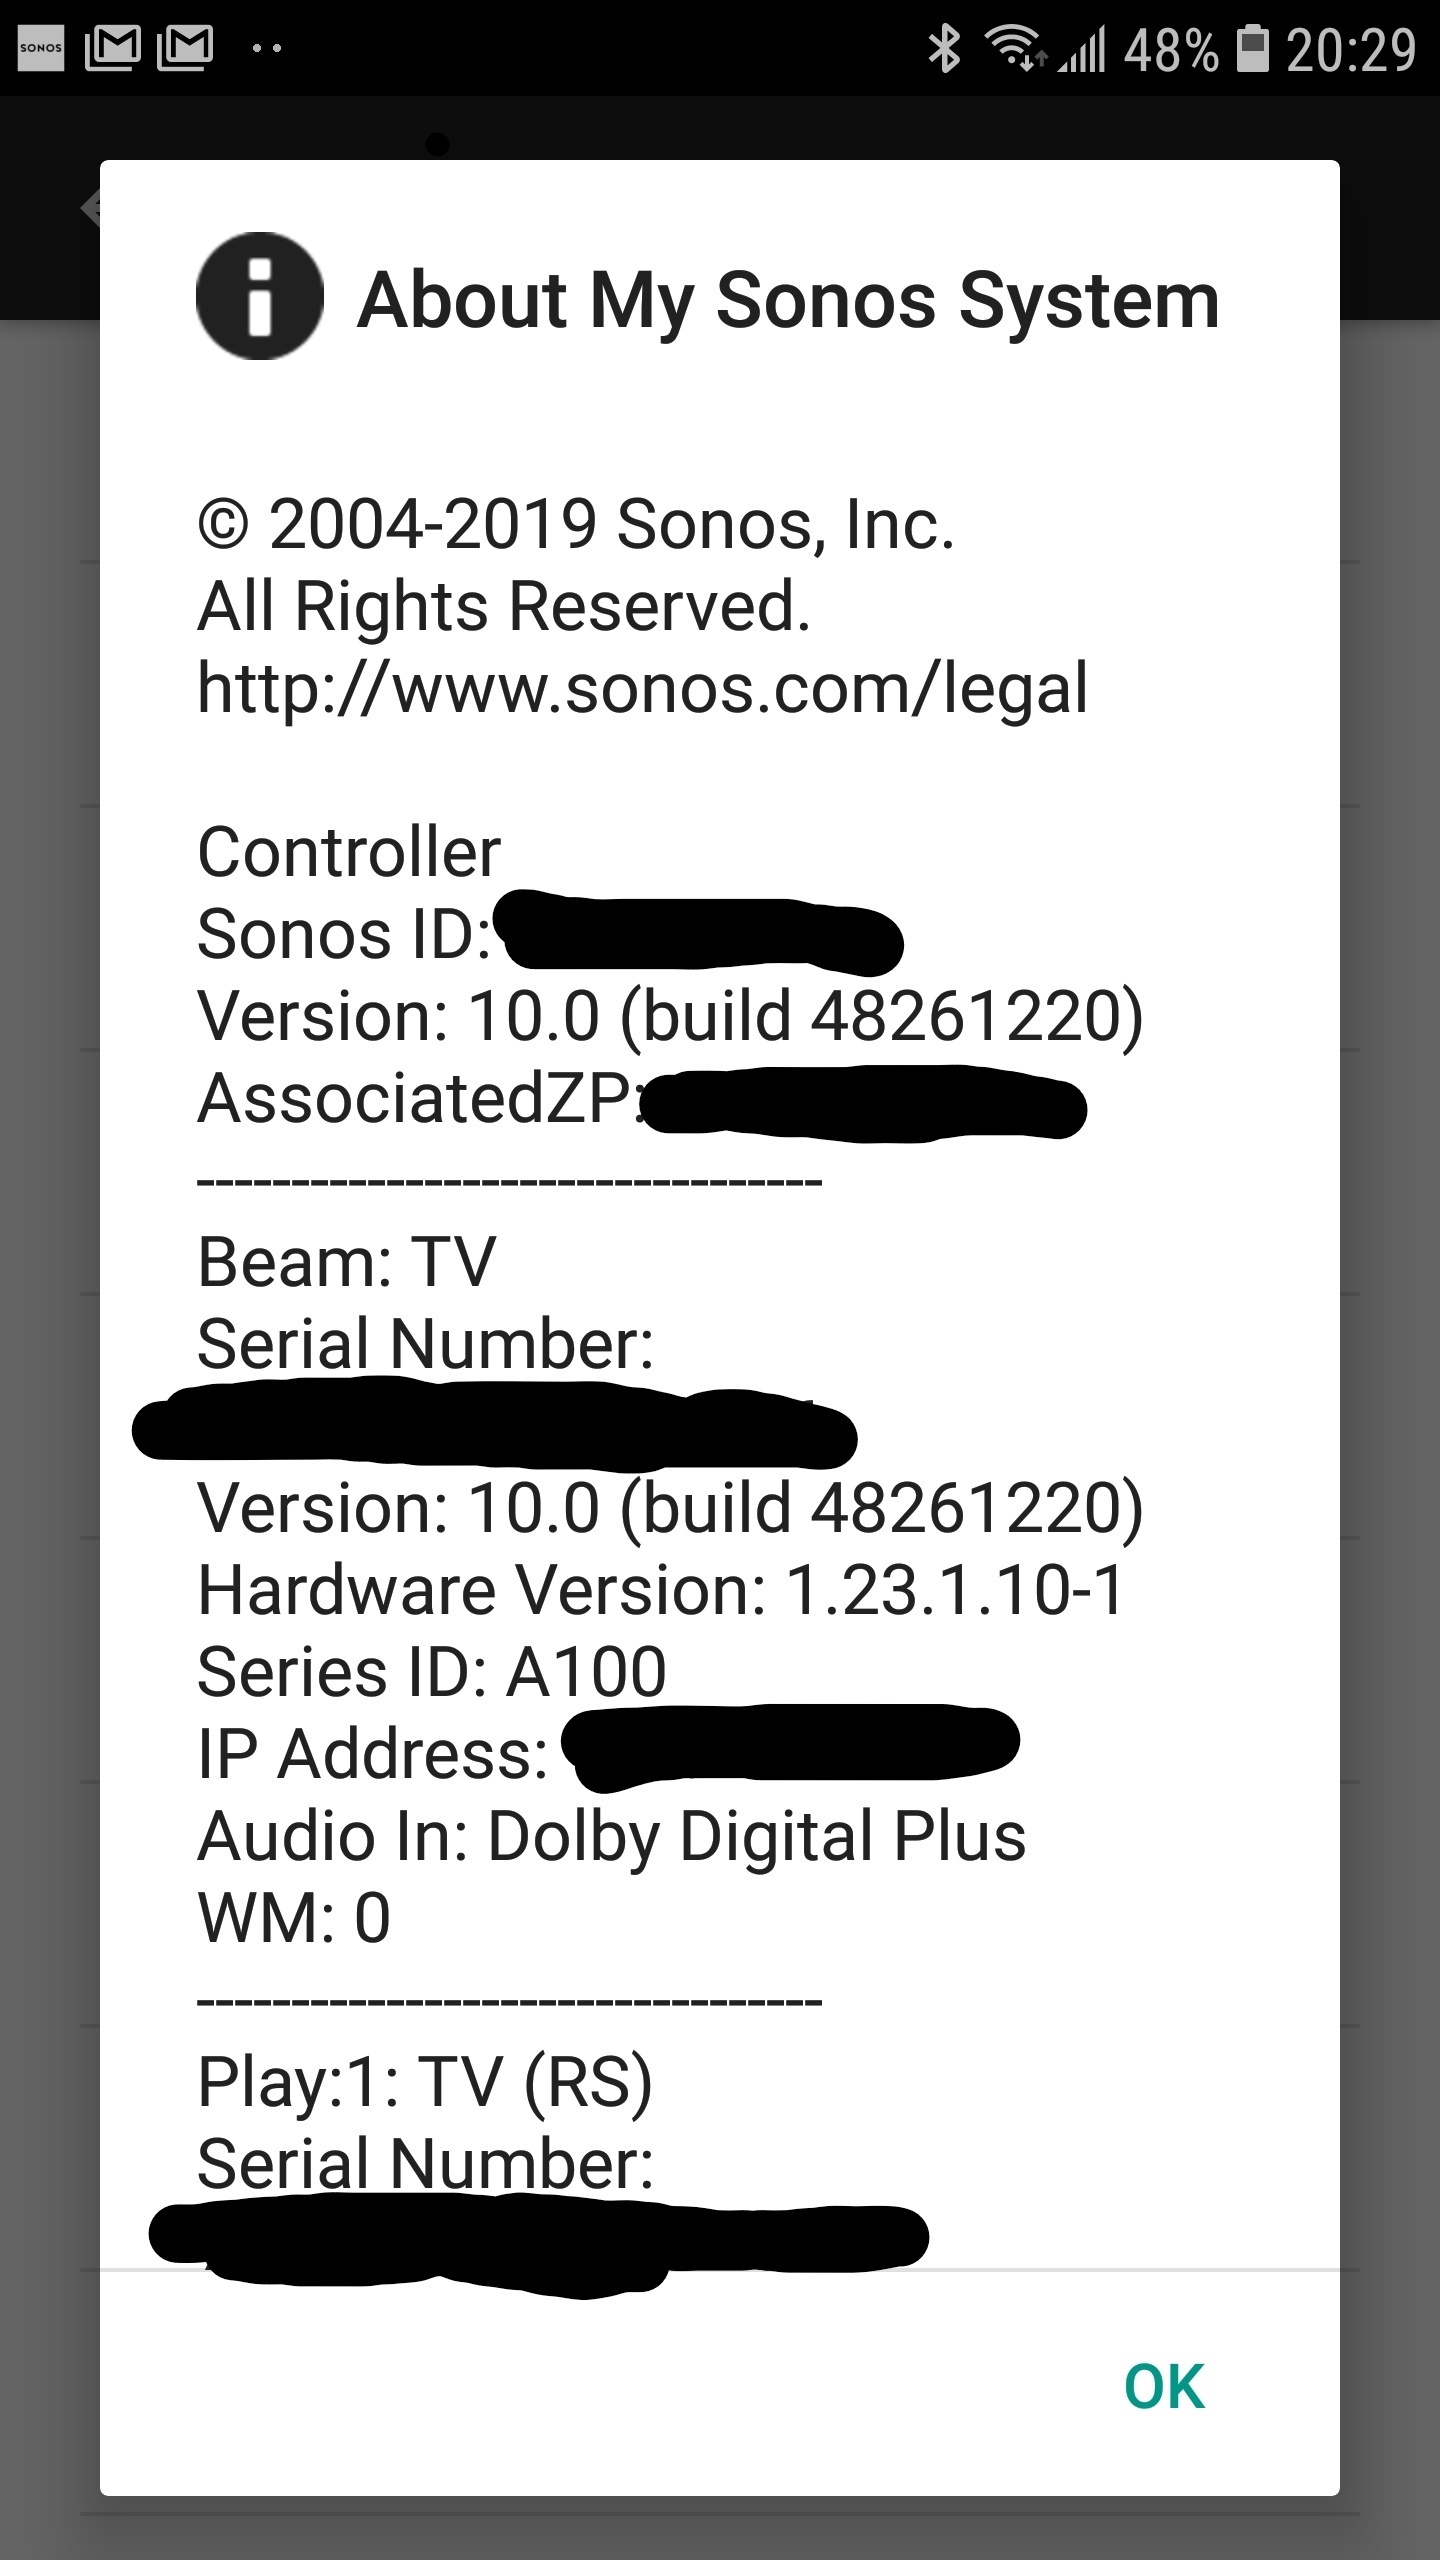 So the can at least tell if it is receiving Dolby Digital Plus! | Community